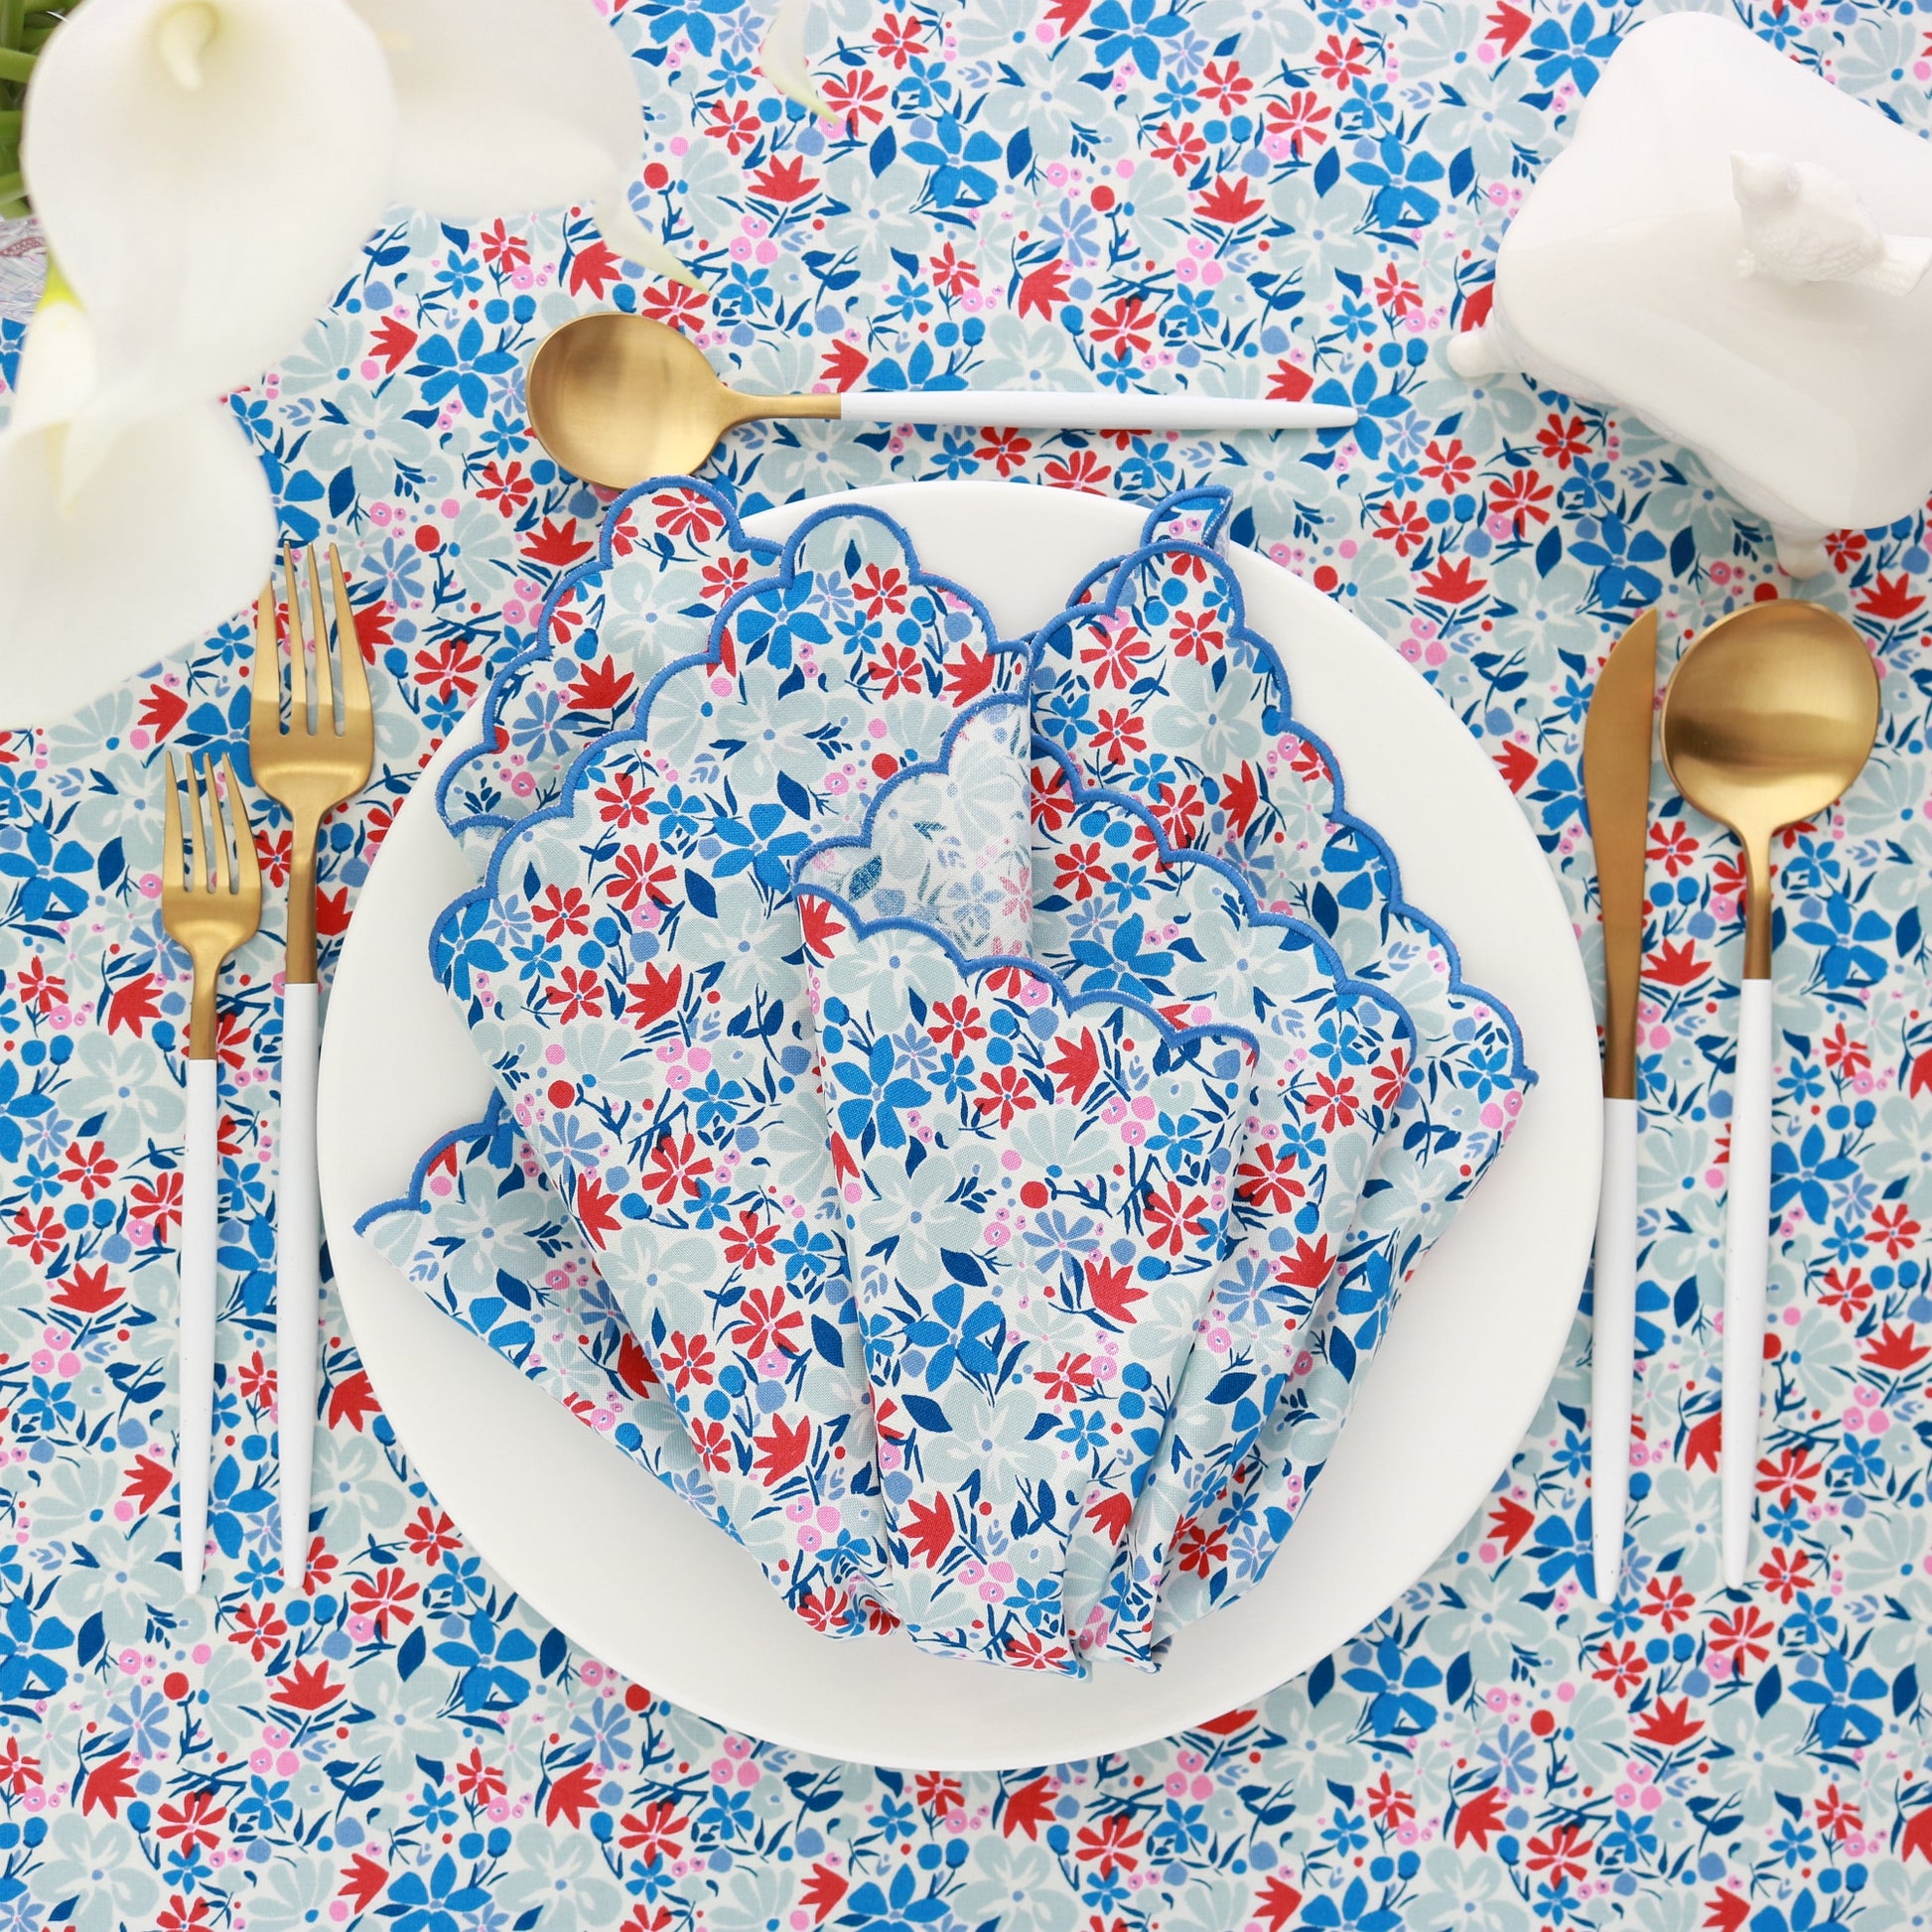 tablescape featuring a Liberty London print tablecloth and scalloped dinner napkin